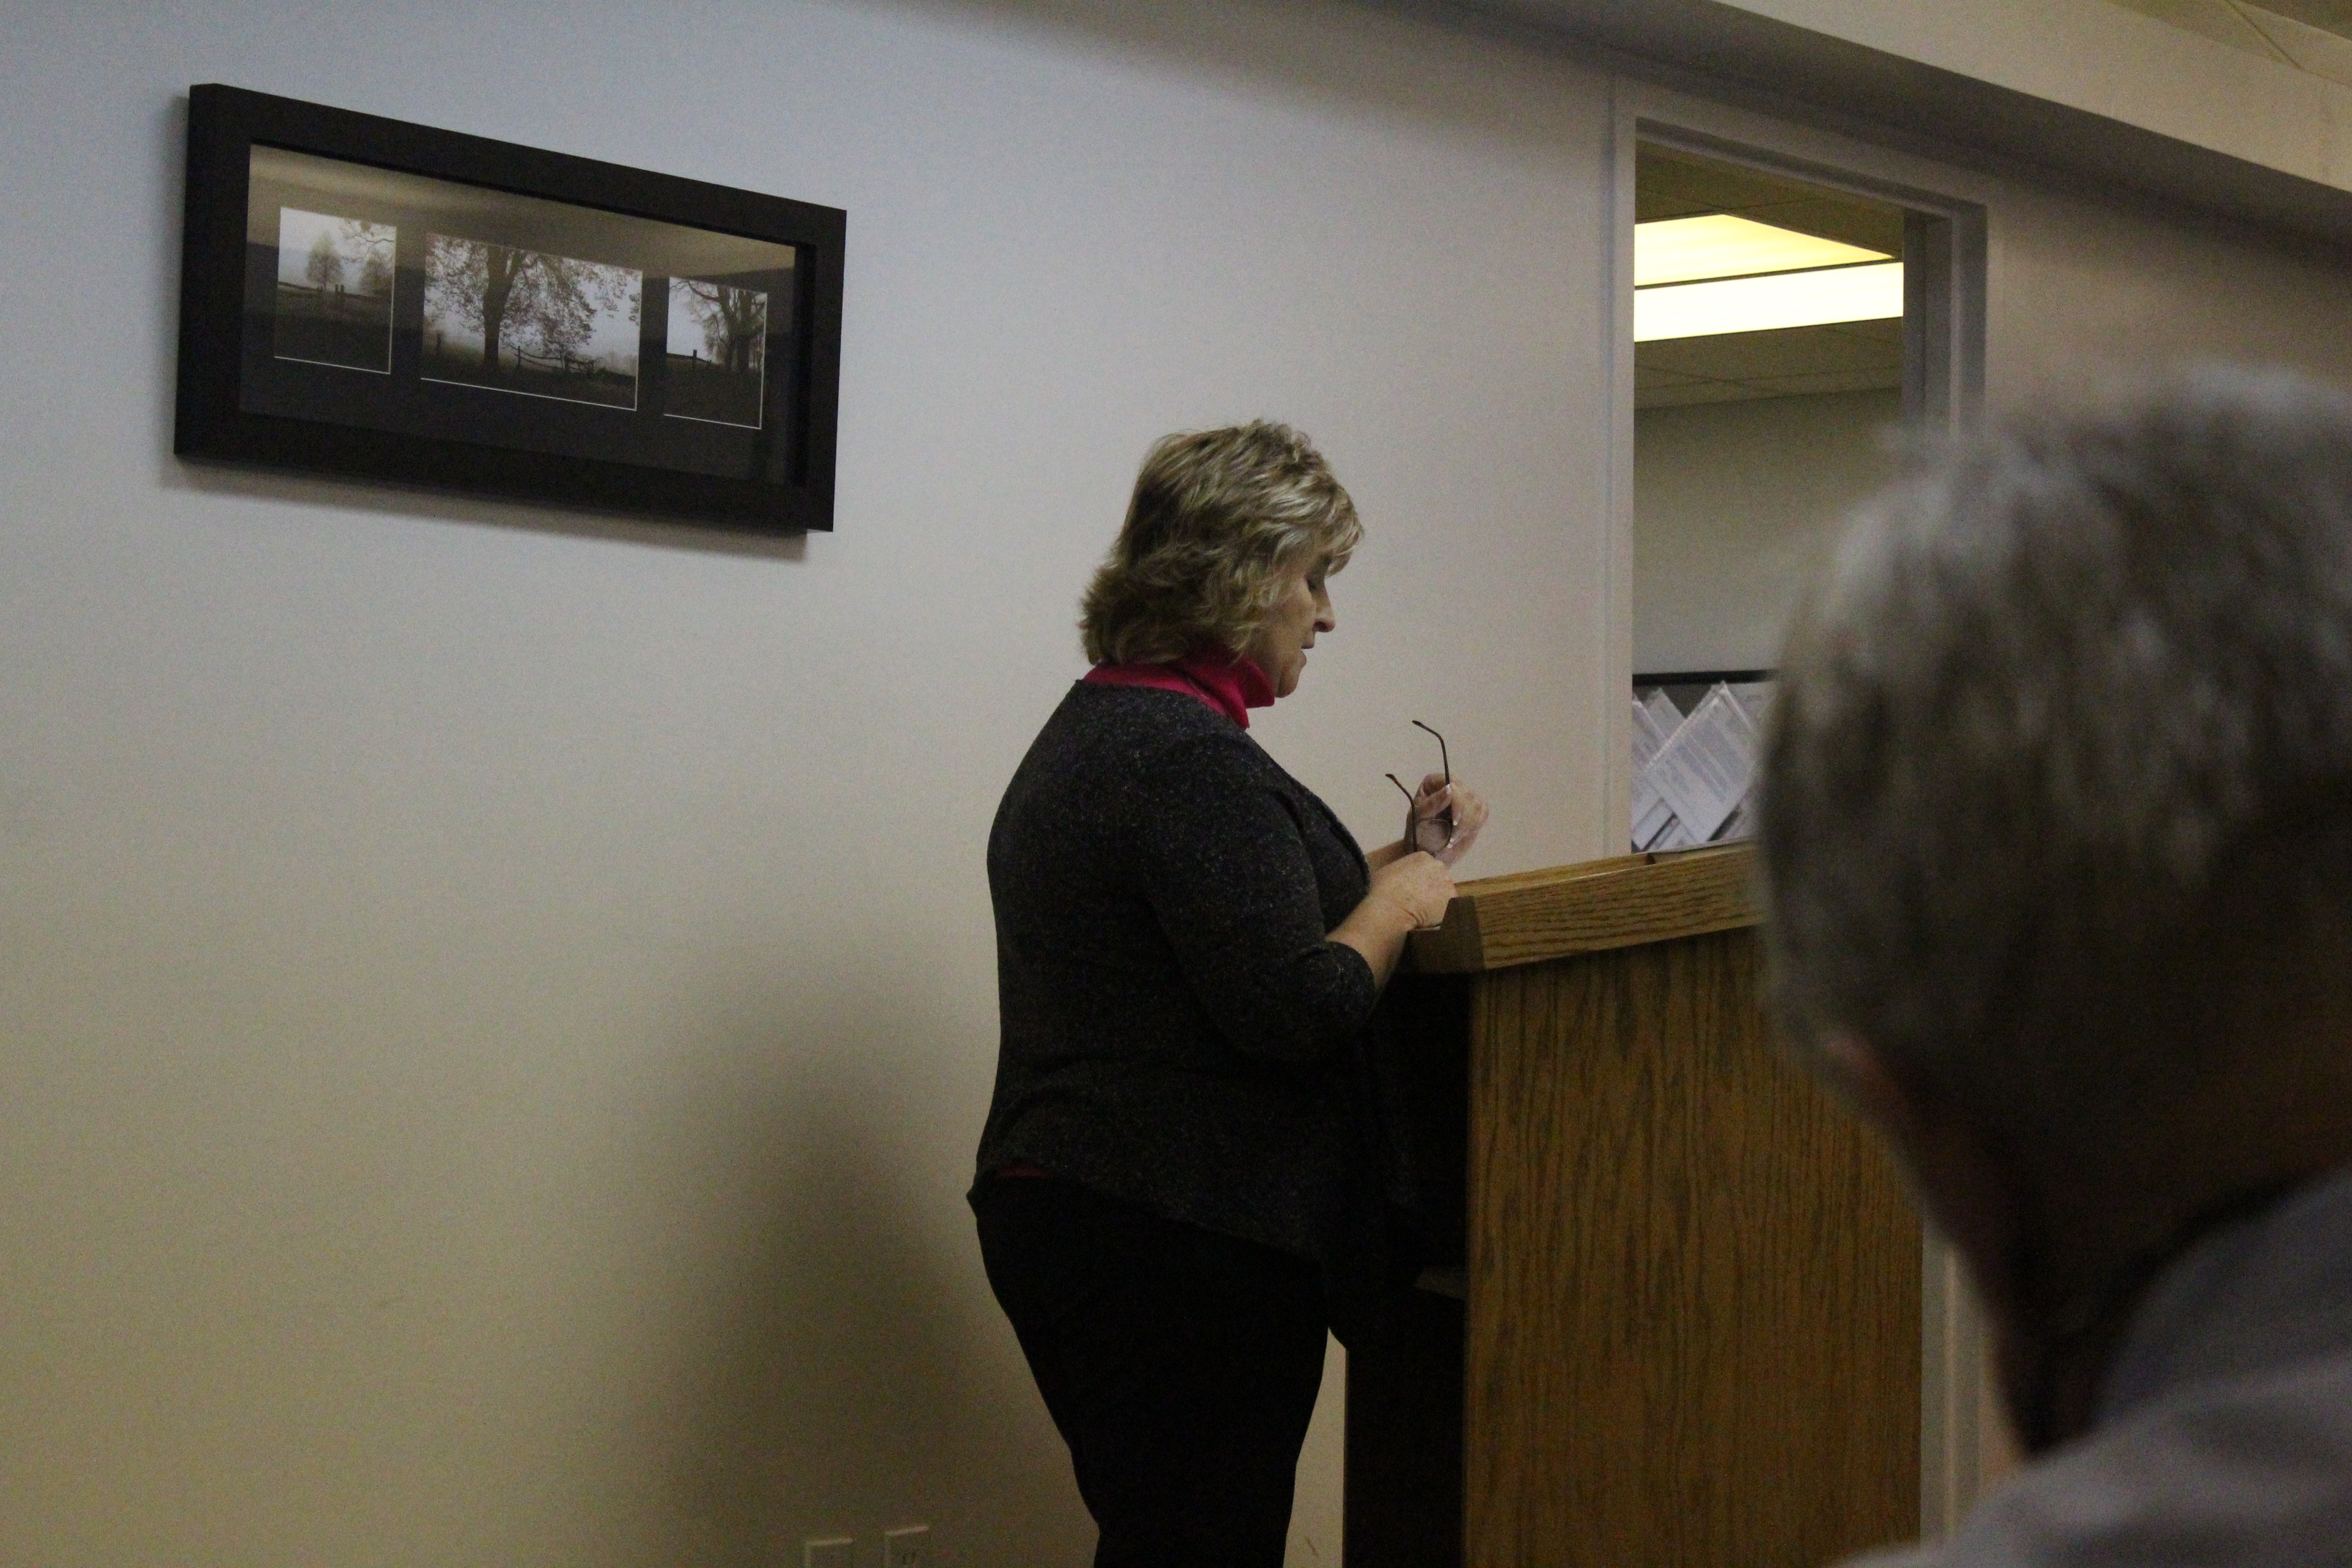 Sharon Gillespie of Young, Miller & Gillespie Public Accountants in Spruce Pine presented her findings to the board and said the county received an unmodified, or clean, audit. (Brandon Roberts/MNJ)